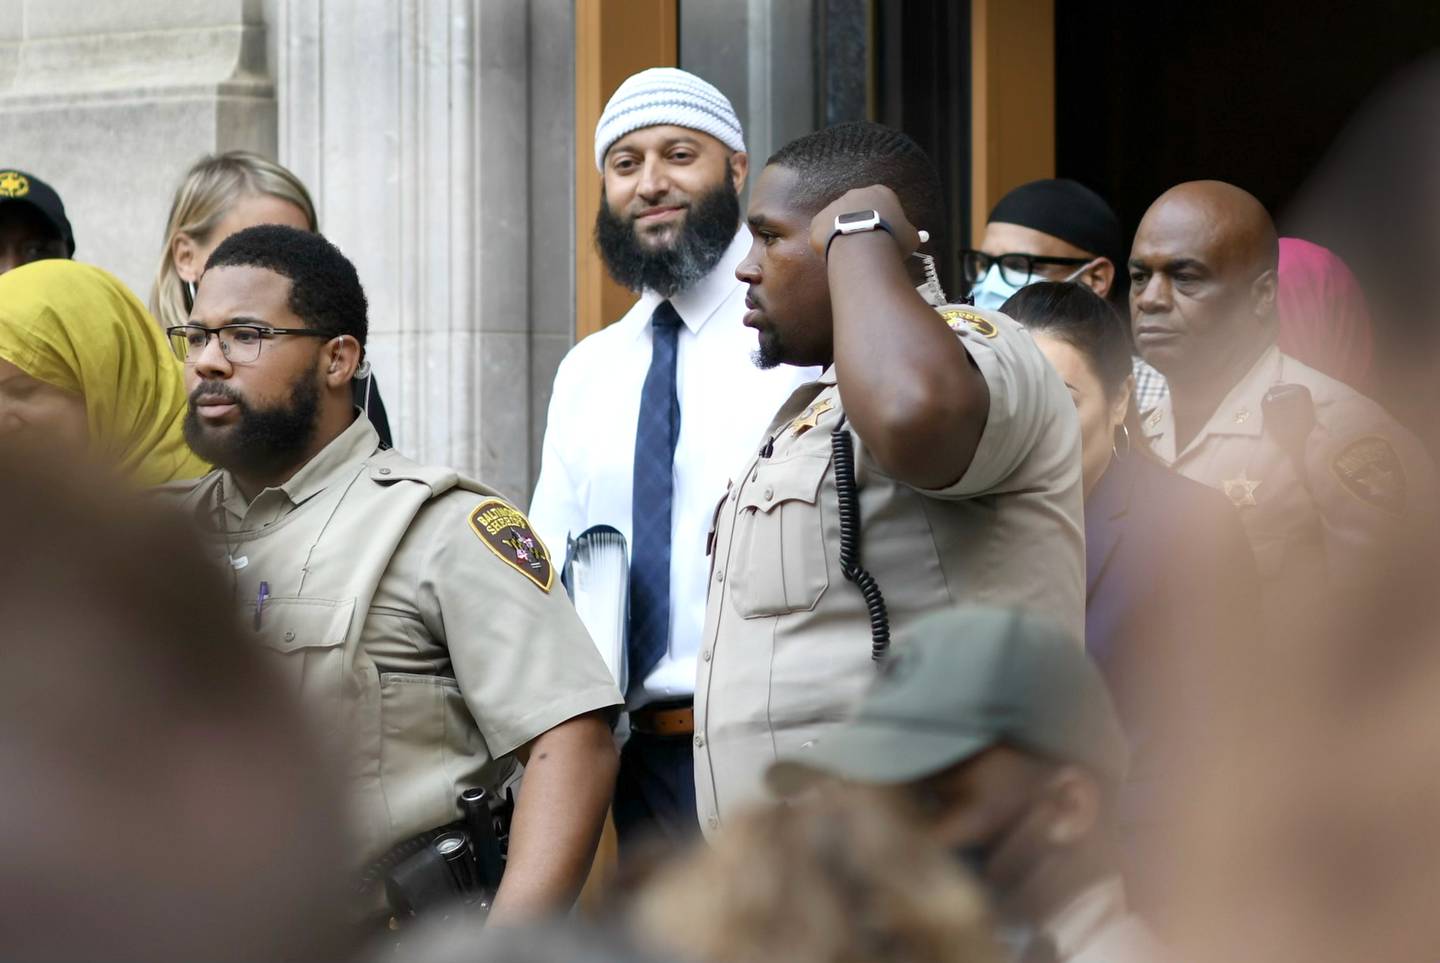 Adnan Syed emerges from the courthouse and after Baltimore Judge Melissa Phinn threw out Syed's murder conviction in light of new evidence that someone else could have strangled Hae Min Lee, ordered the release of  Syed.